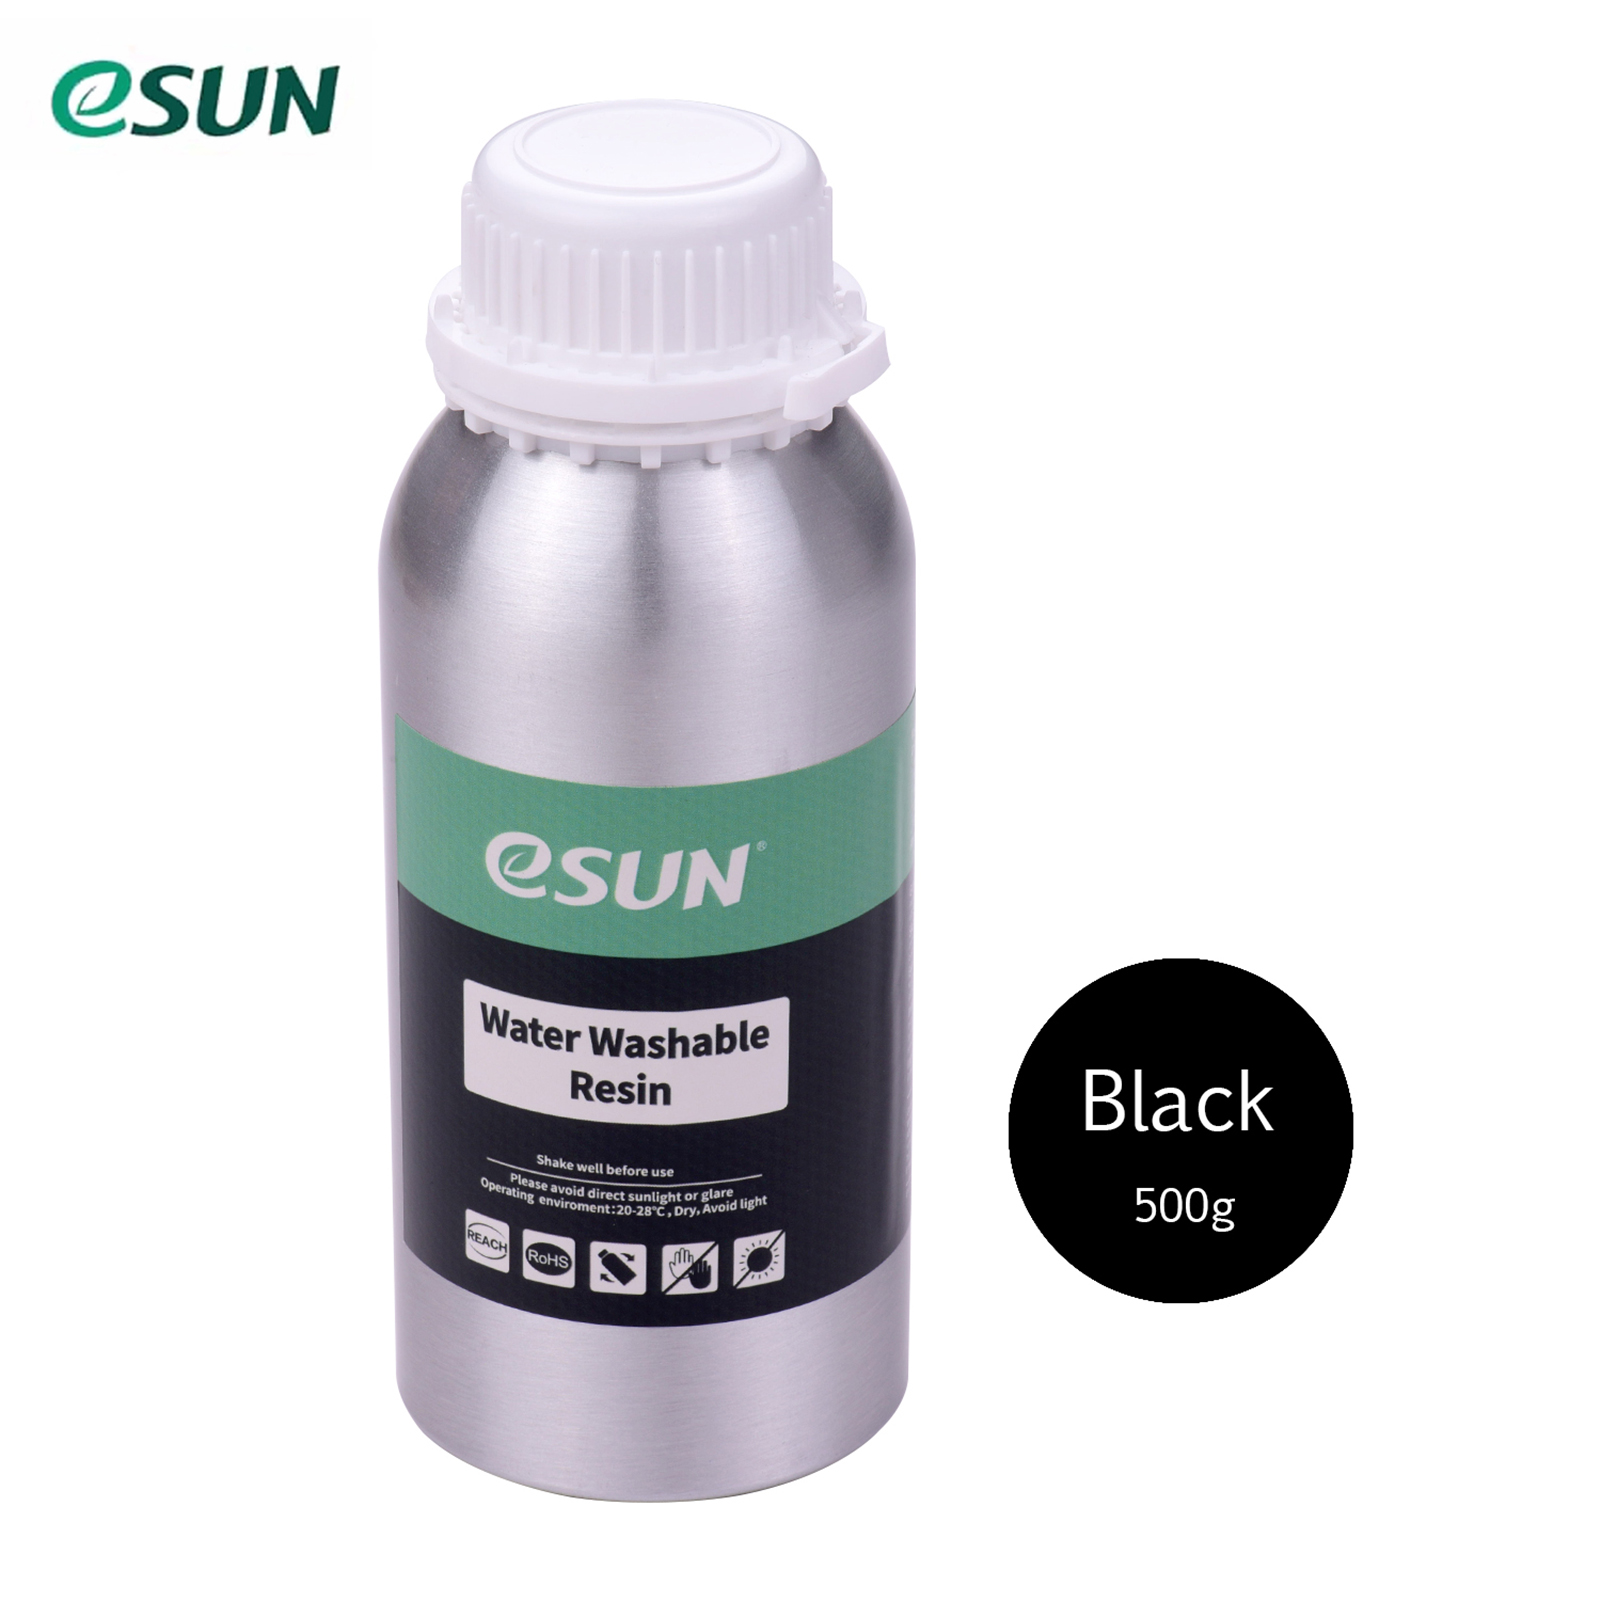 eSUN Water Washable Resin for LCD 3D Printer Aluminum Bottle Liquid Printing Material 76D Hardness Consumables Compatible with Anycubic Nova Sparkmaker Uniz Creality 3D Printers Accessories 500g/Bottle Skin-Colored